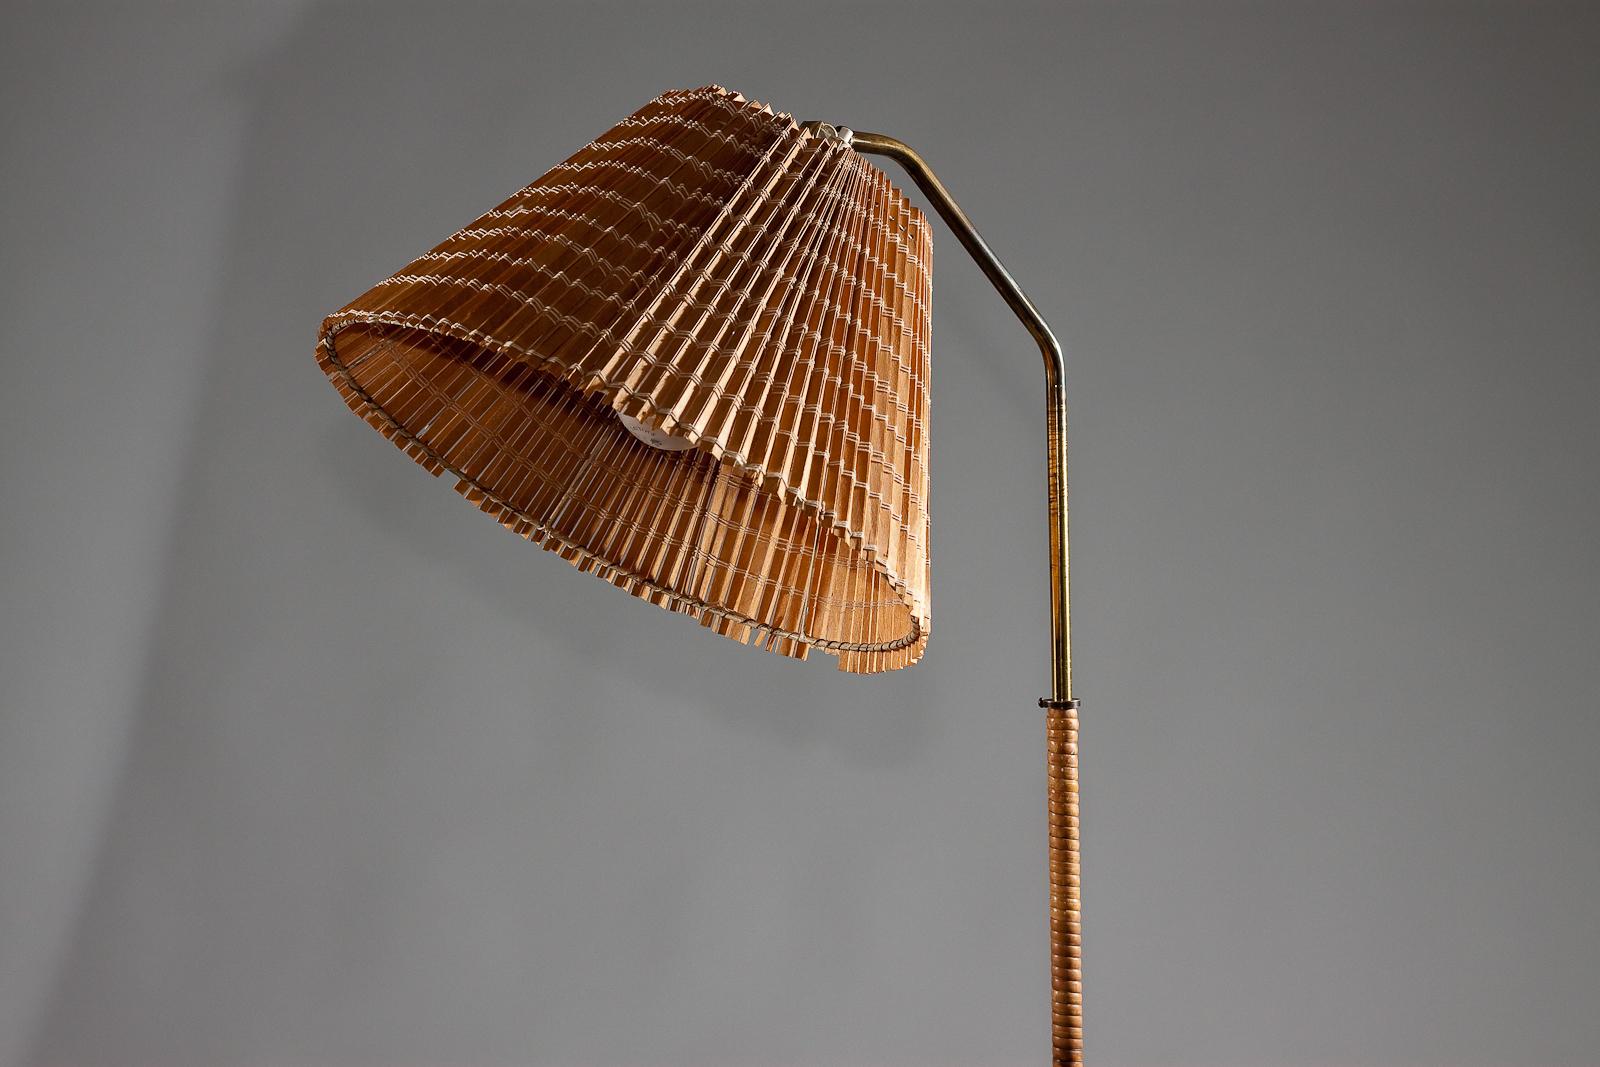 20th Century Finnish 1950's brass floor lamp with wrapped rattan stem and wooden slat shade